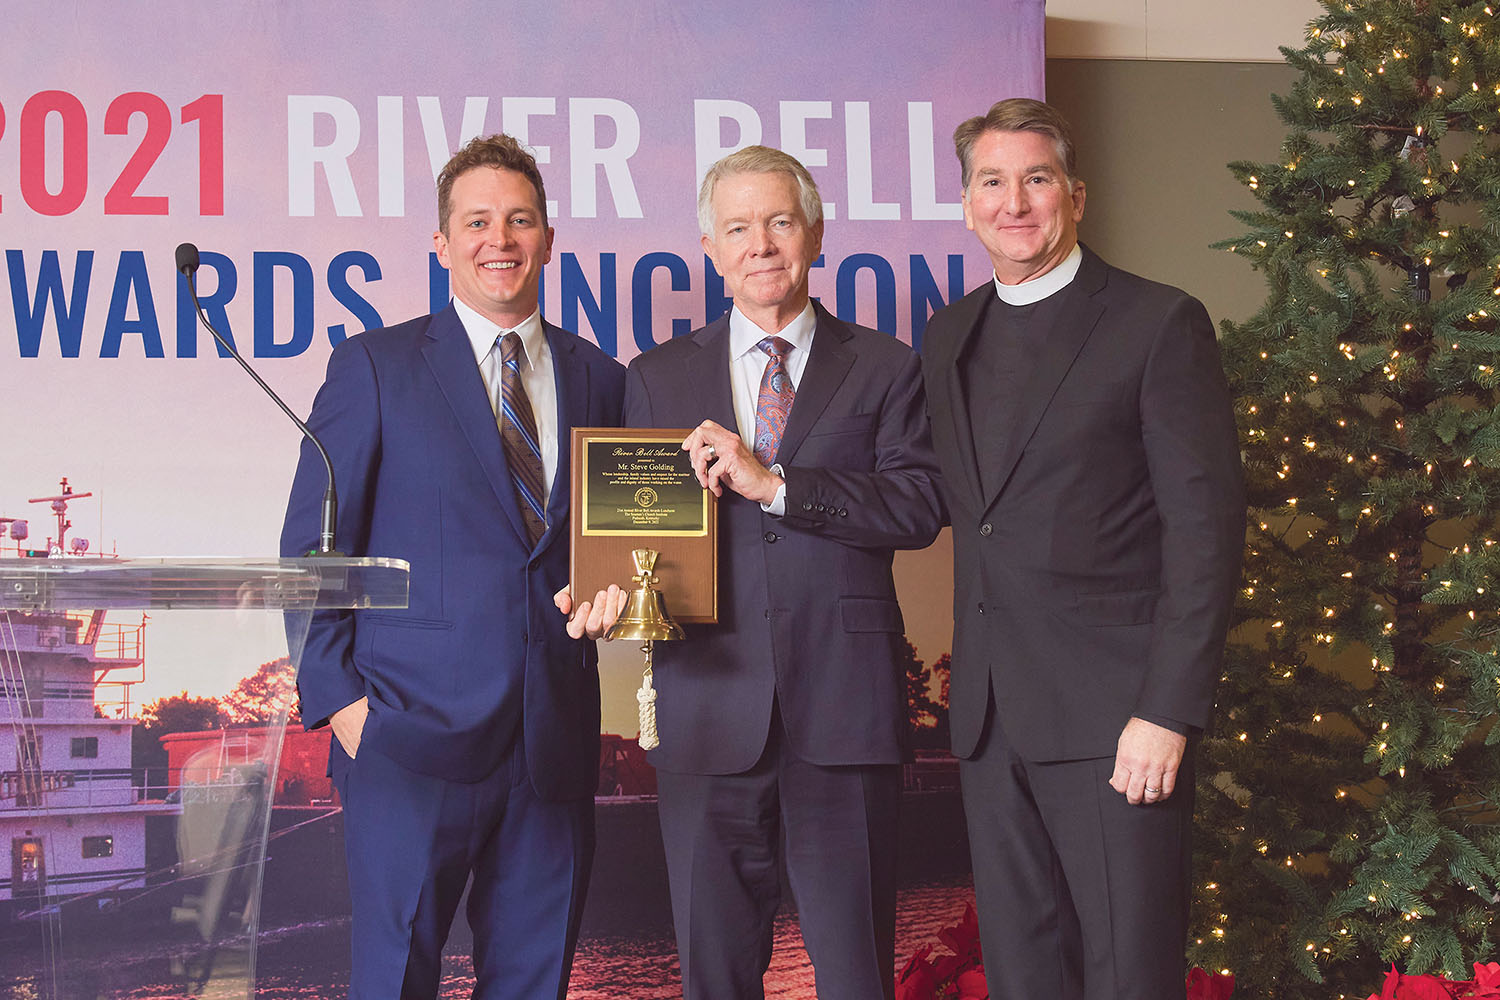 Golding, Nadeau Lead River Bell Honorees